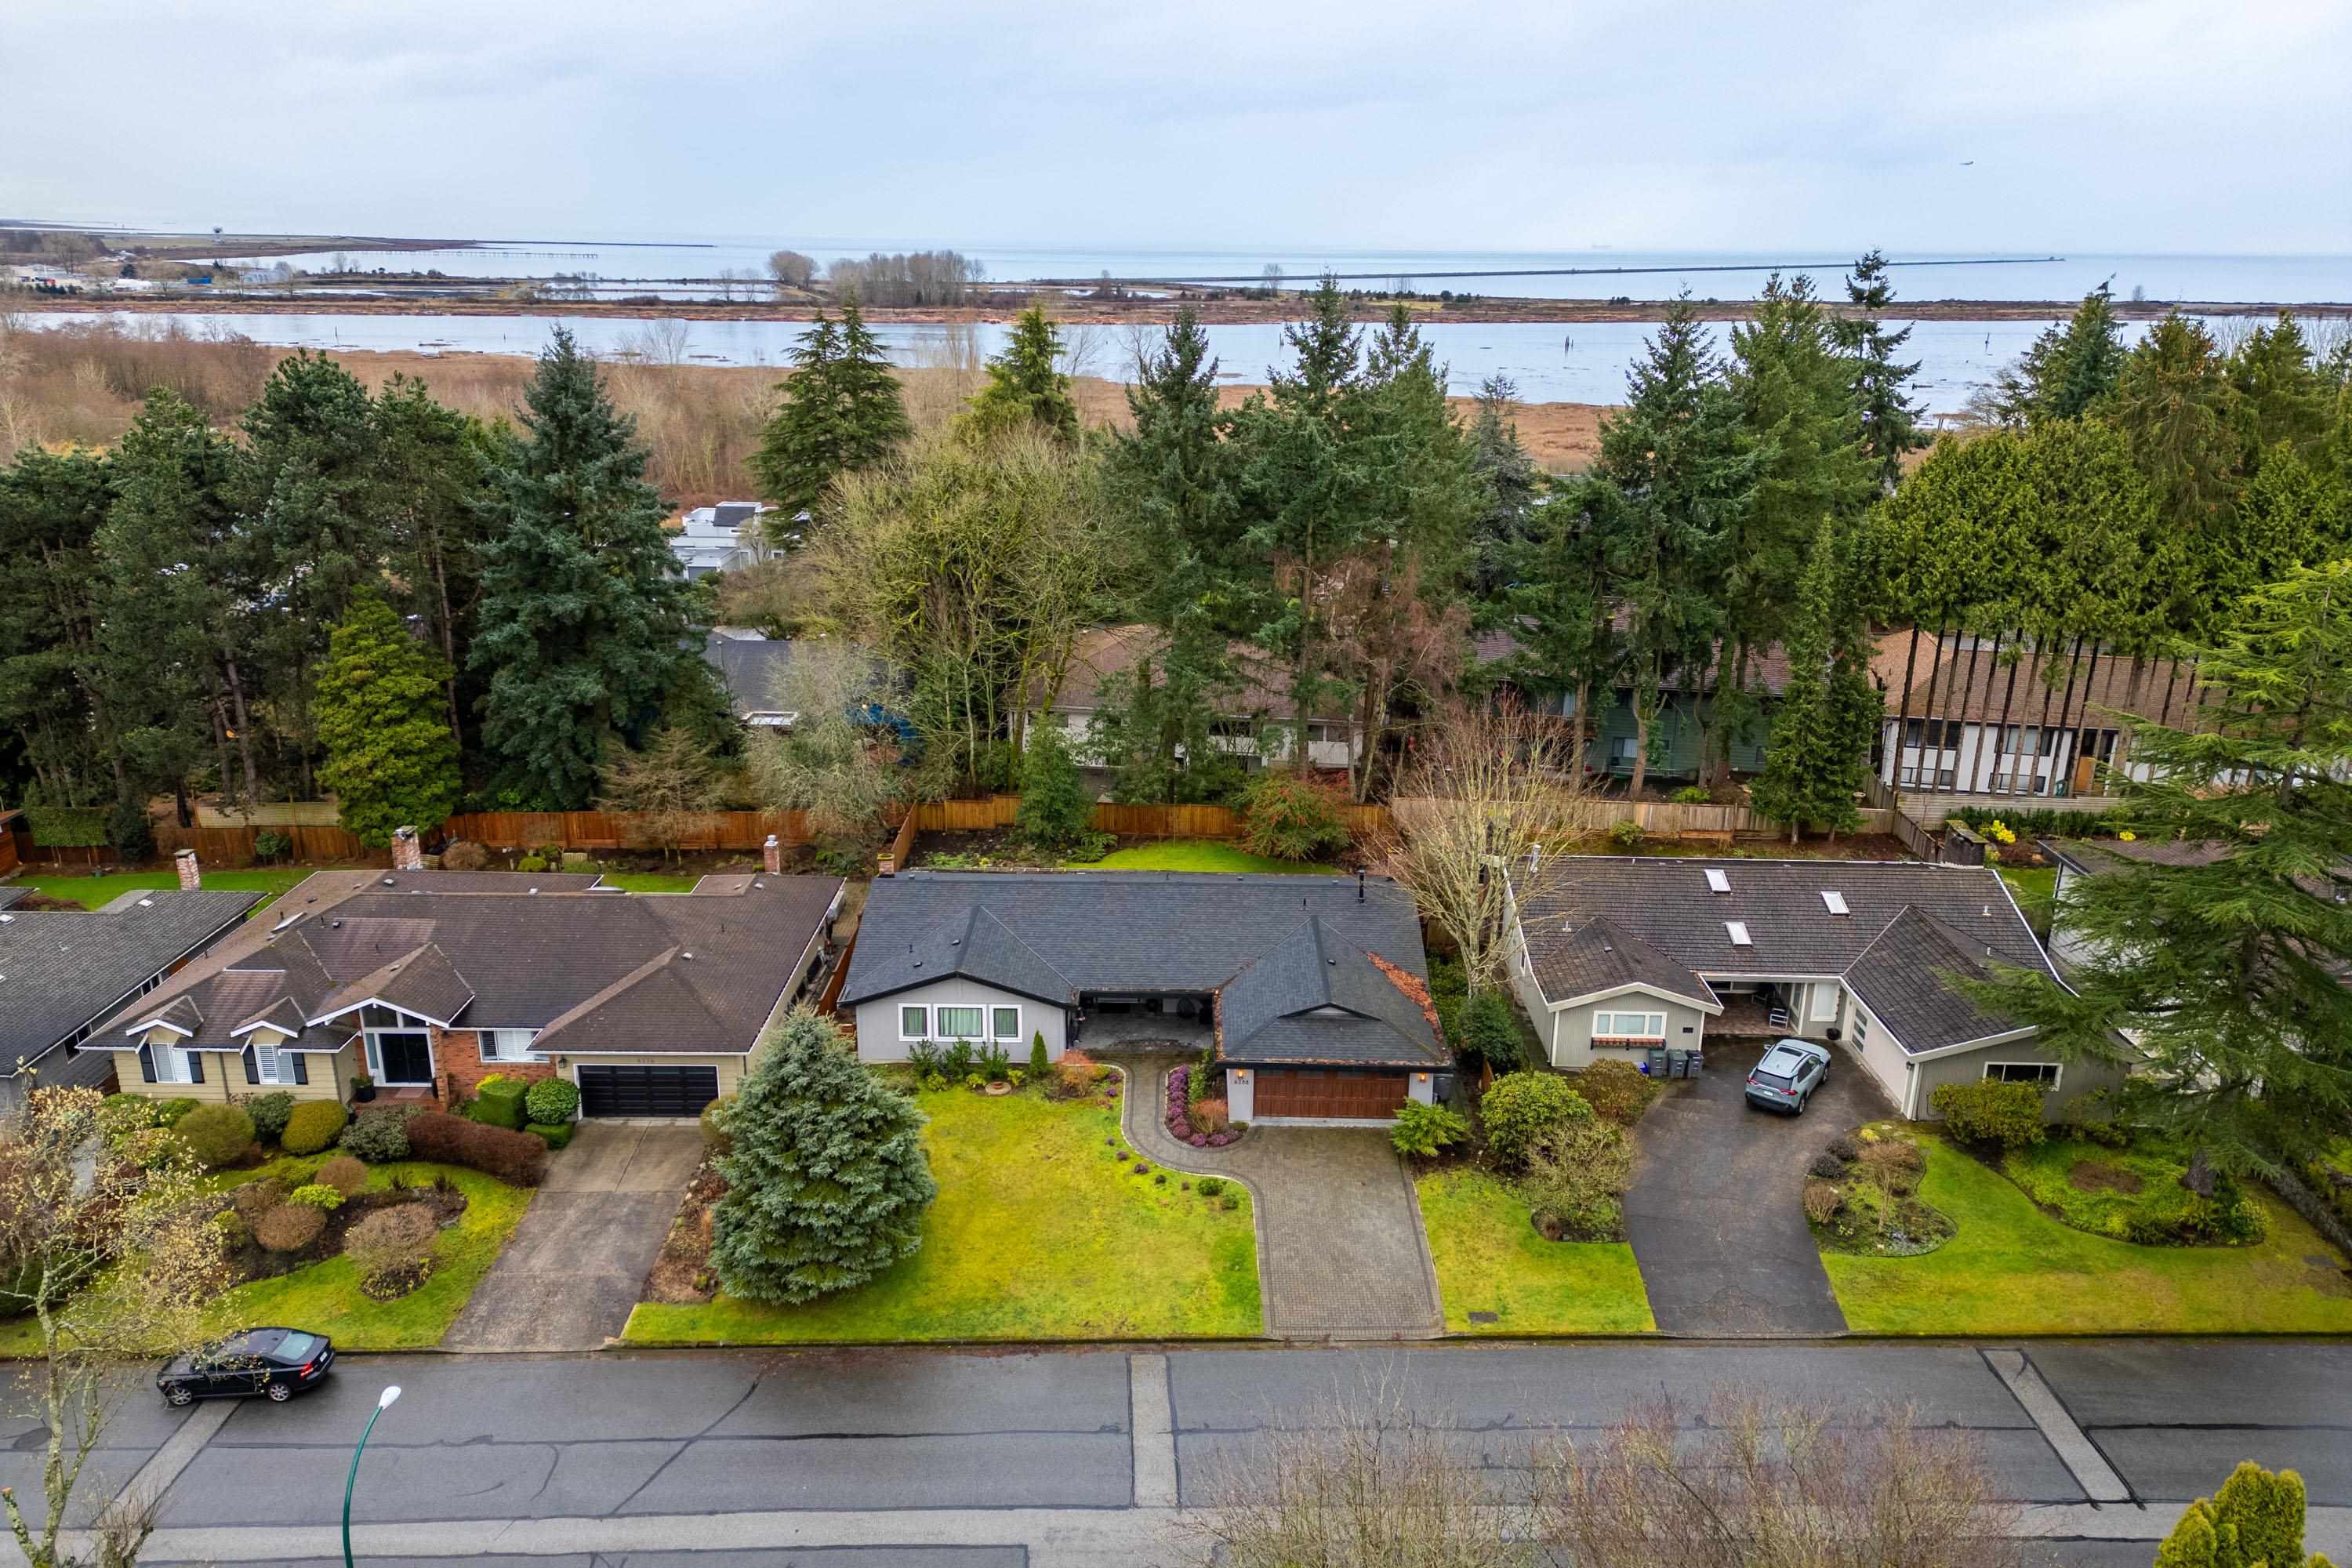 Listing image of 4288 MUSQUEAM DRIVE